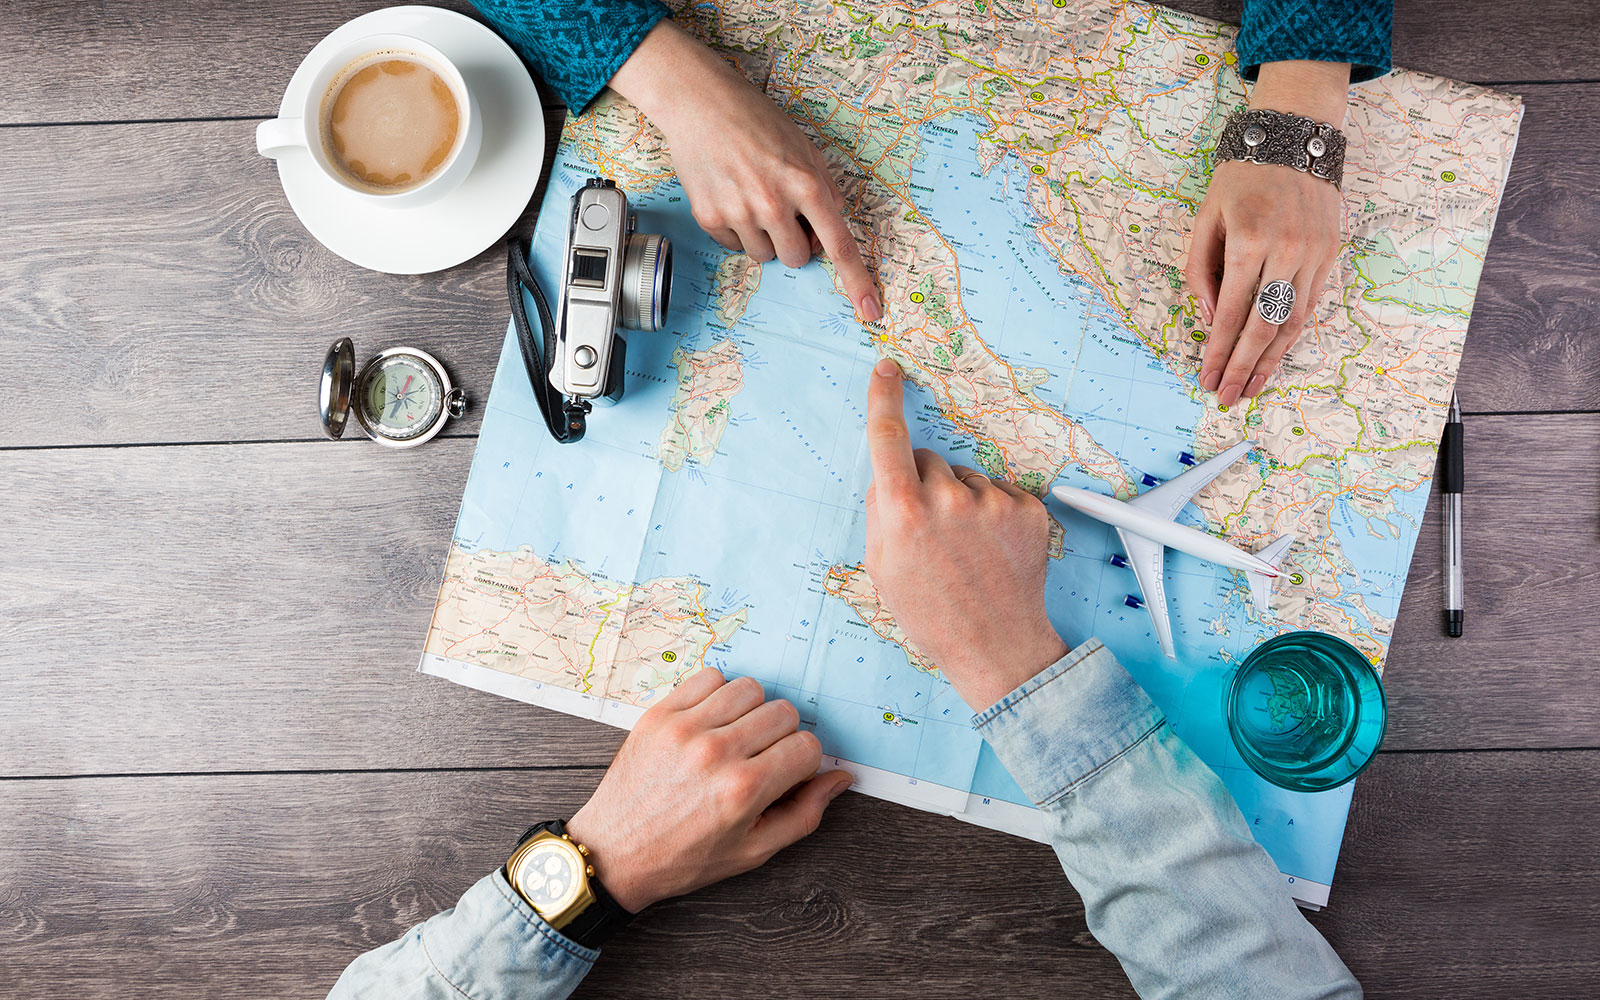 Do You Really Save Money by Planning a Trip Ahead of Time?